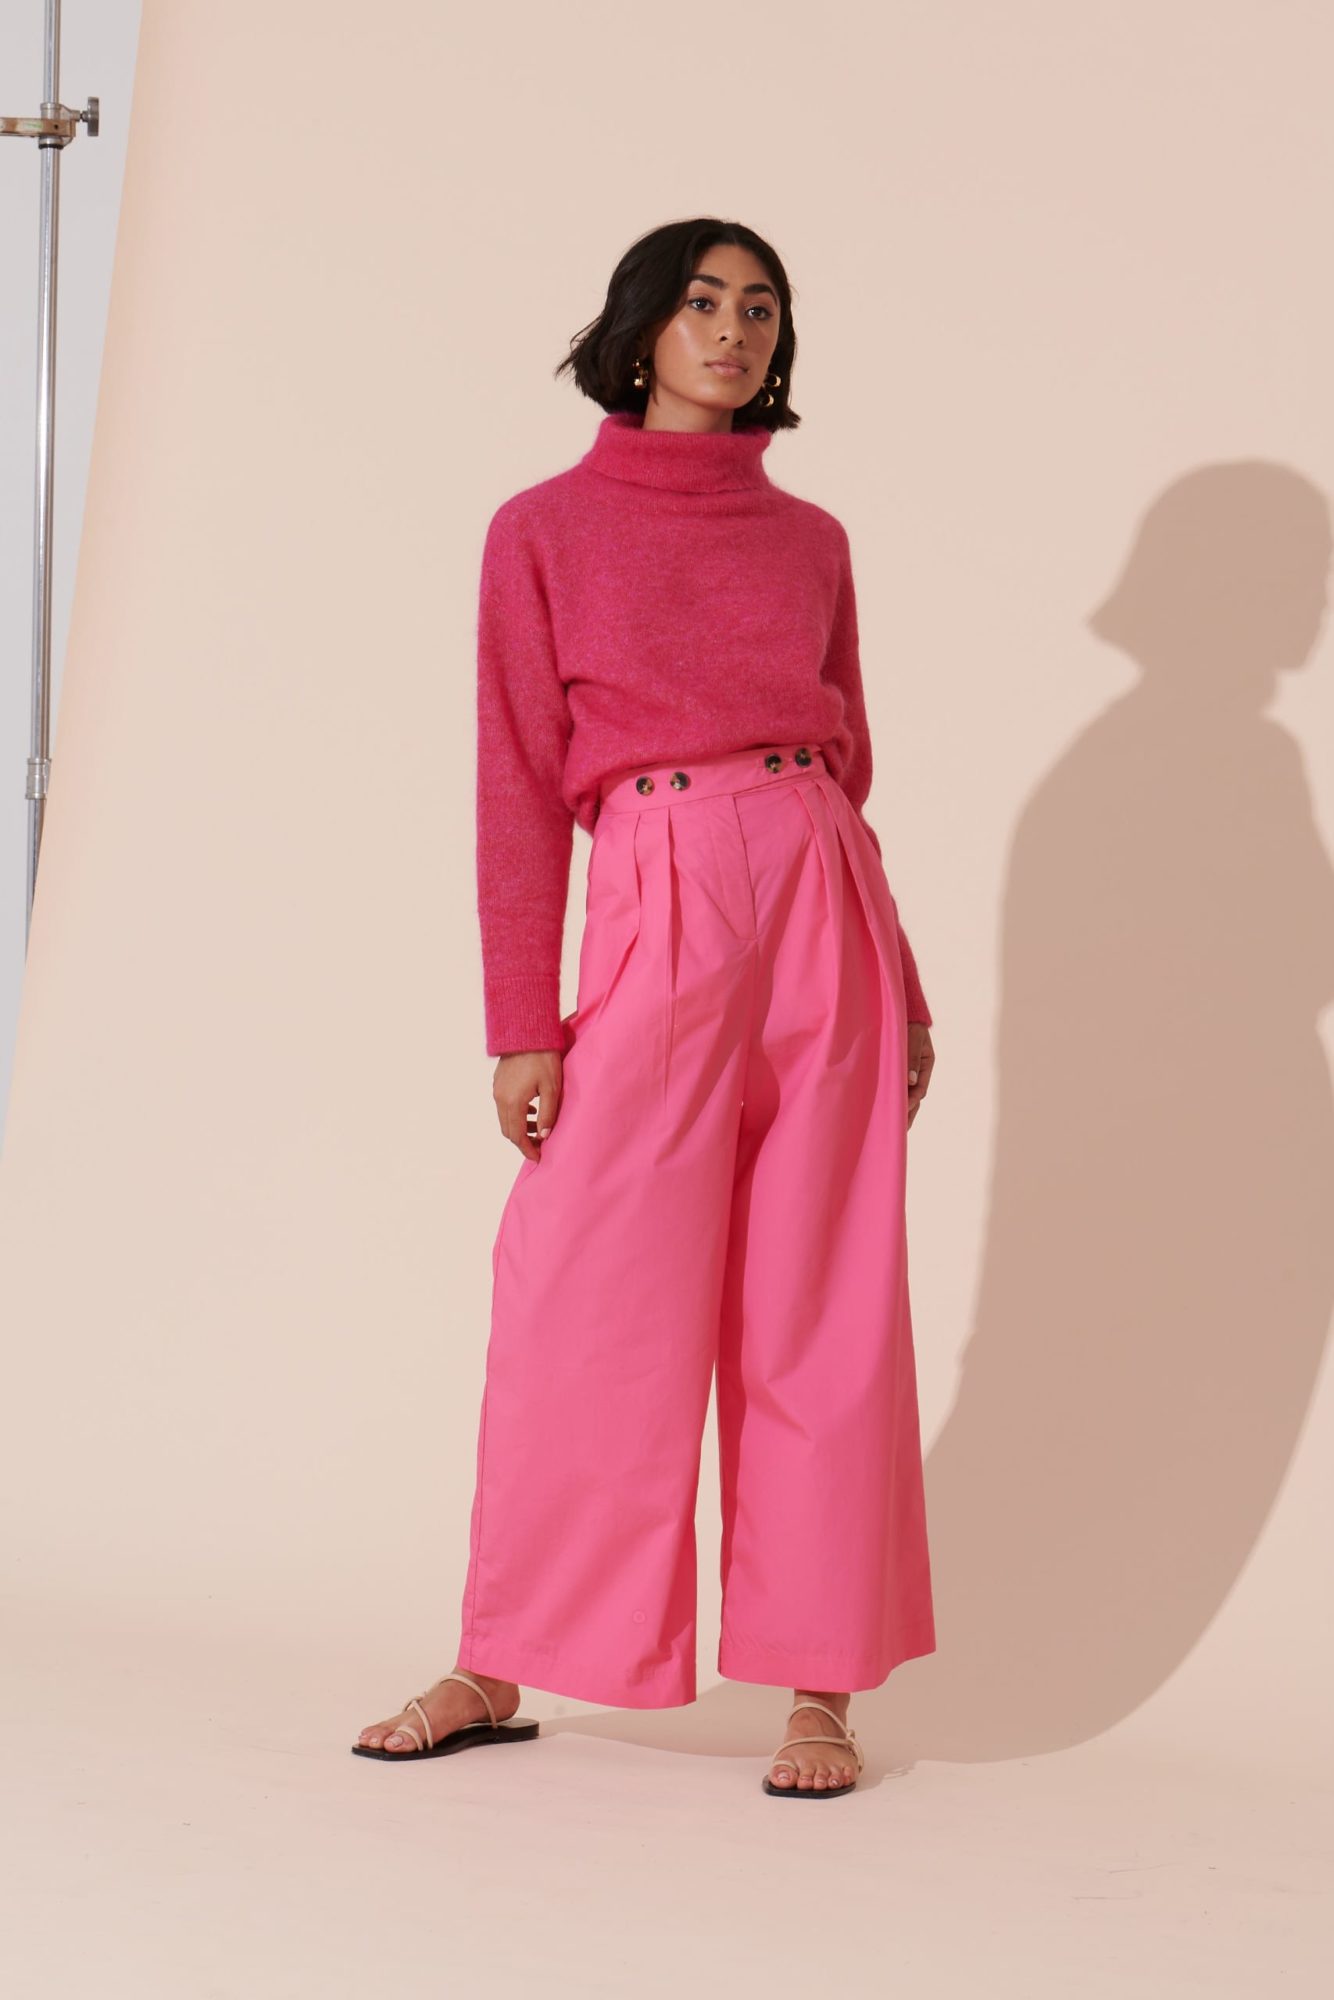 RUBY’s first collection for 2020 is here